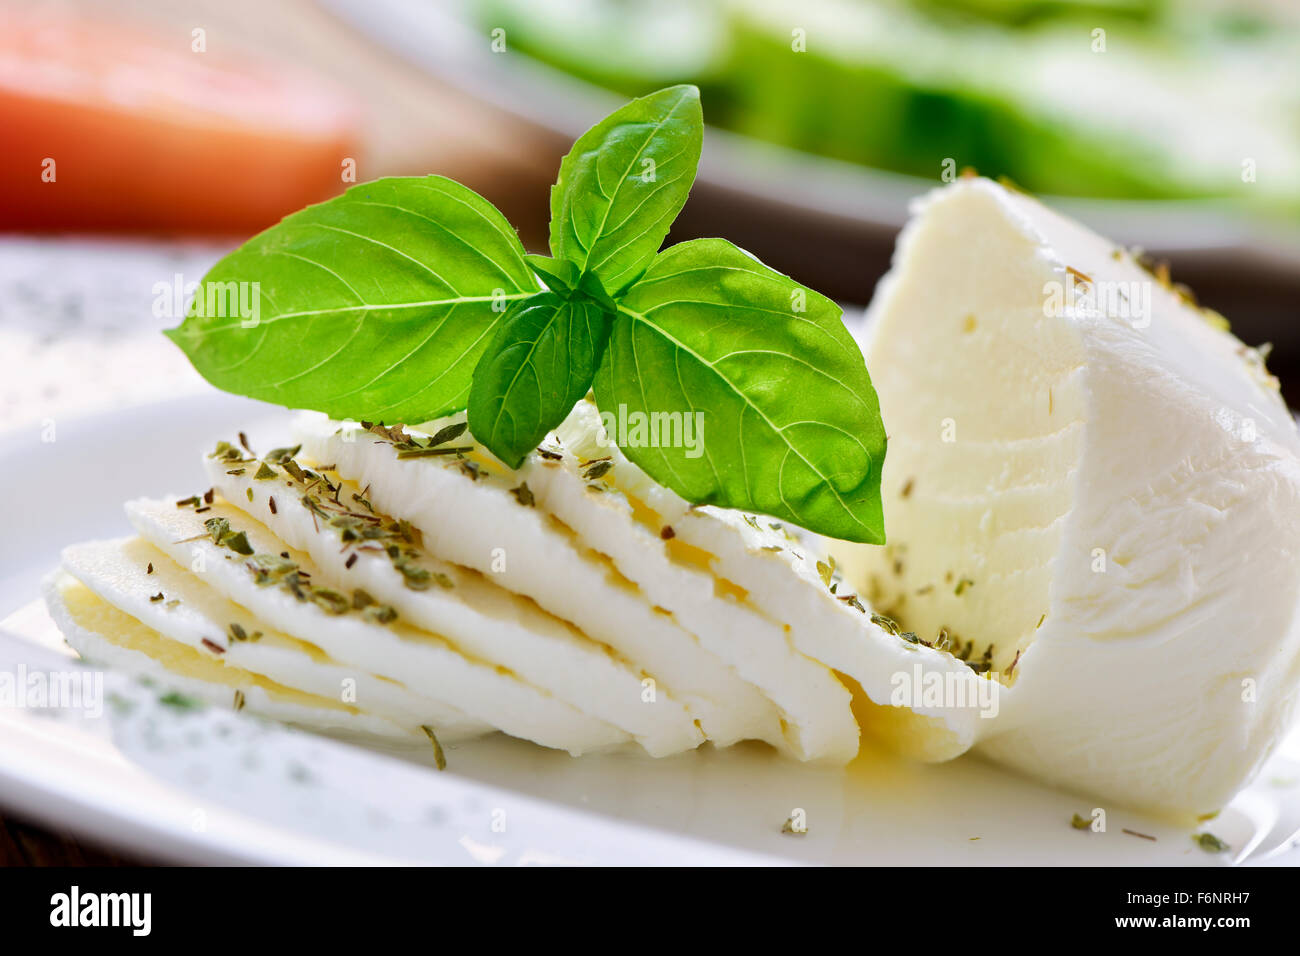 closeup of a plate with a sliced fresh cheese Stock Photo